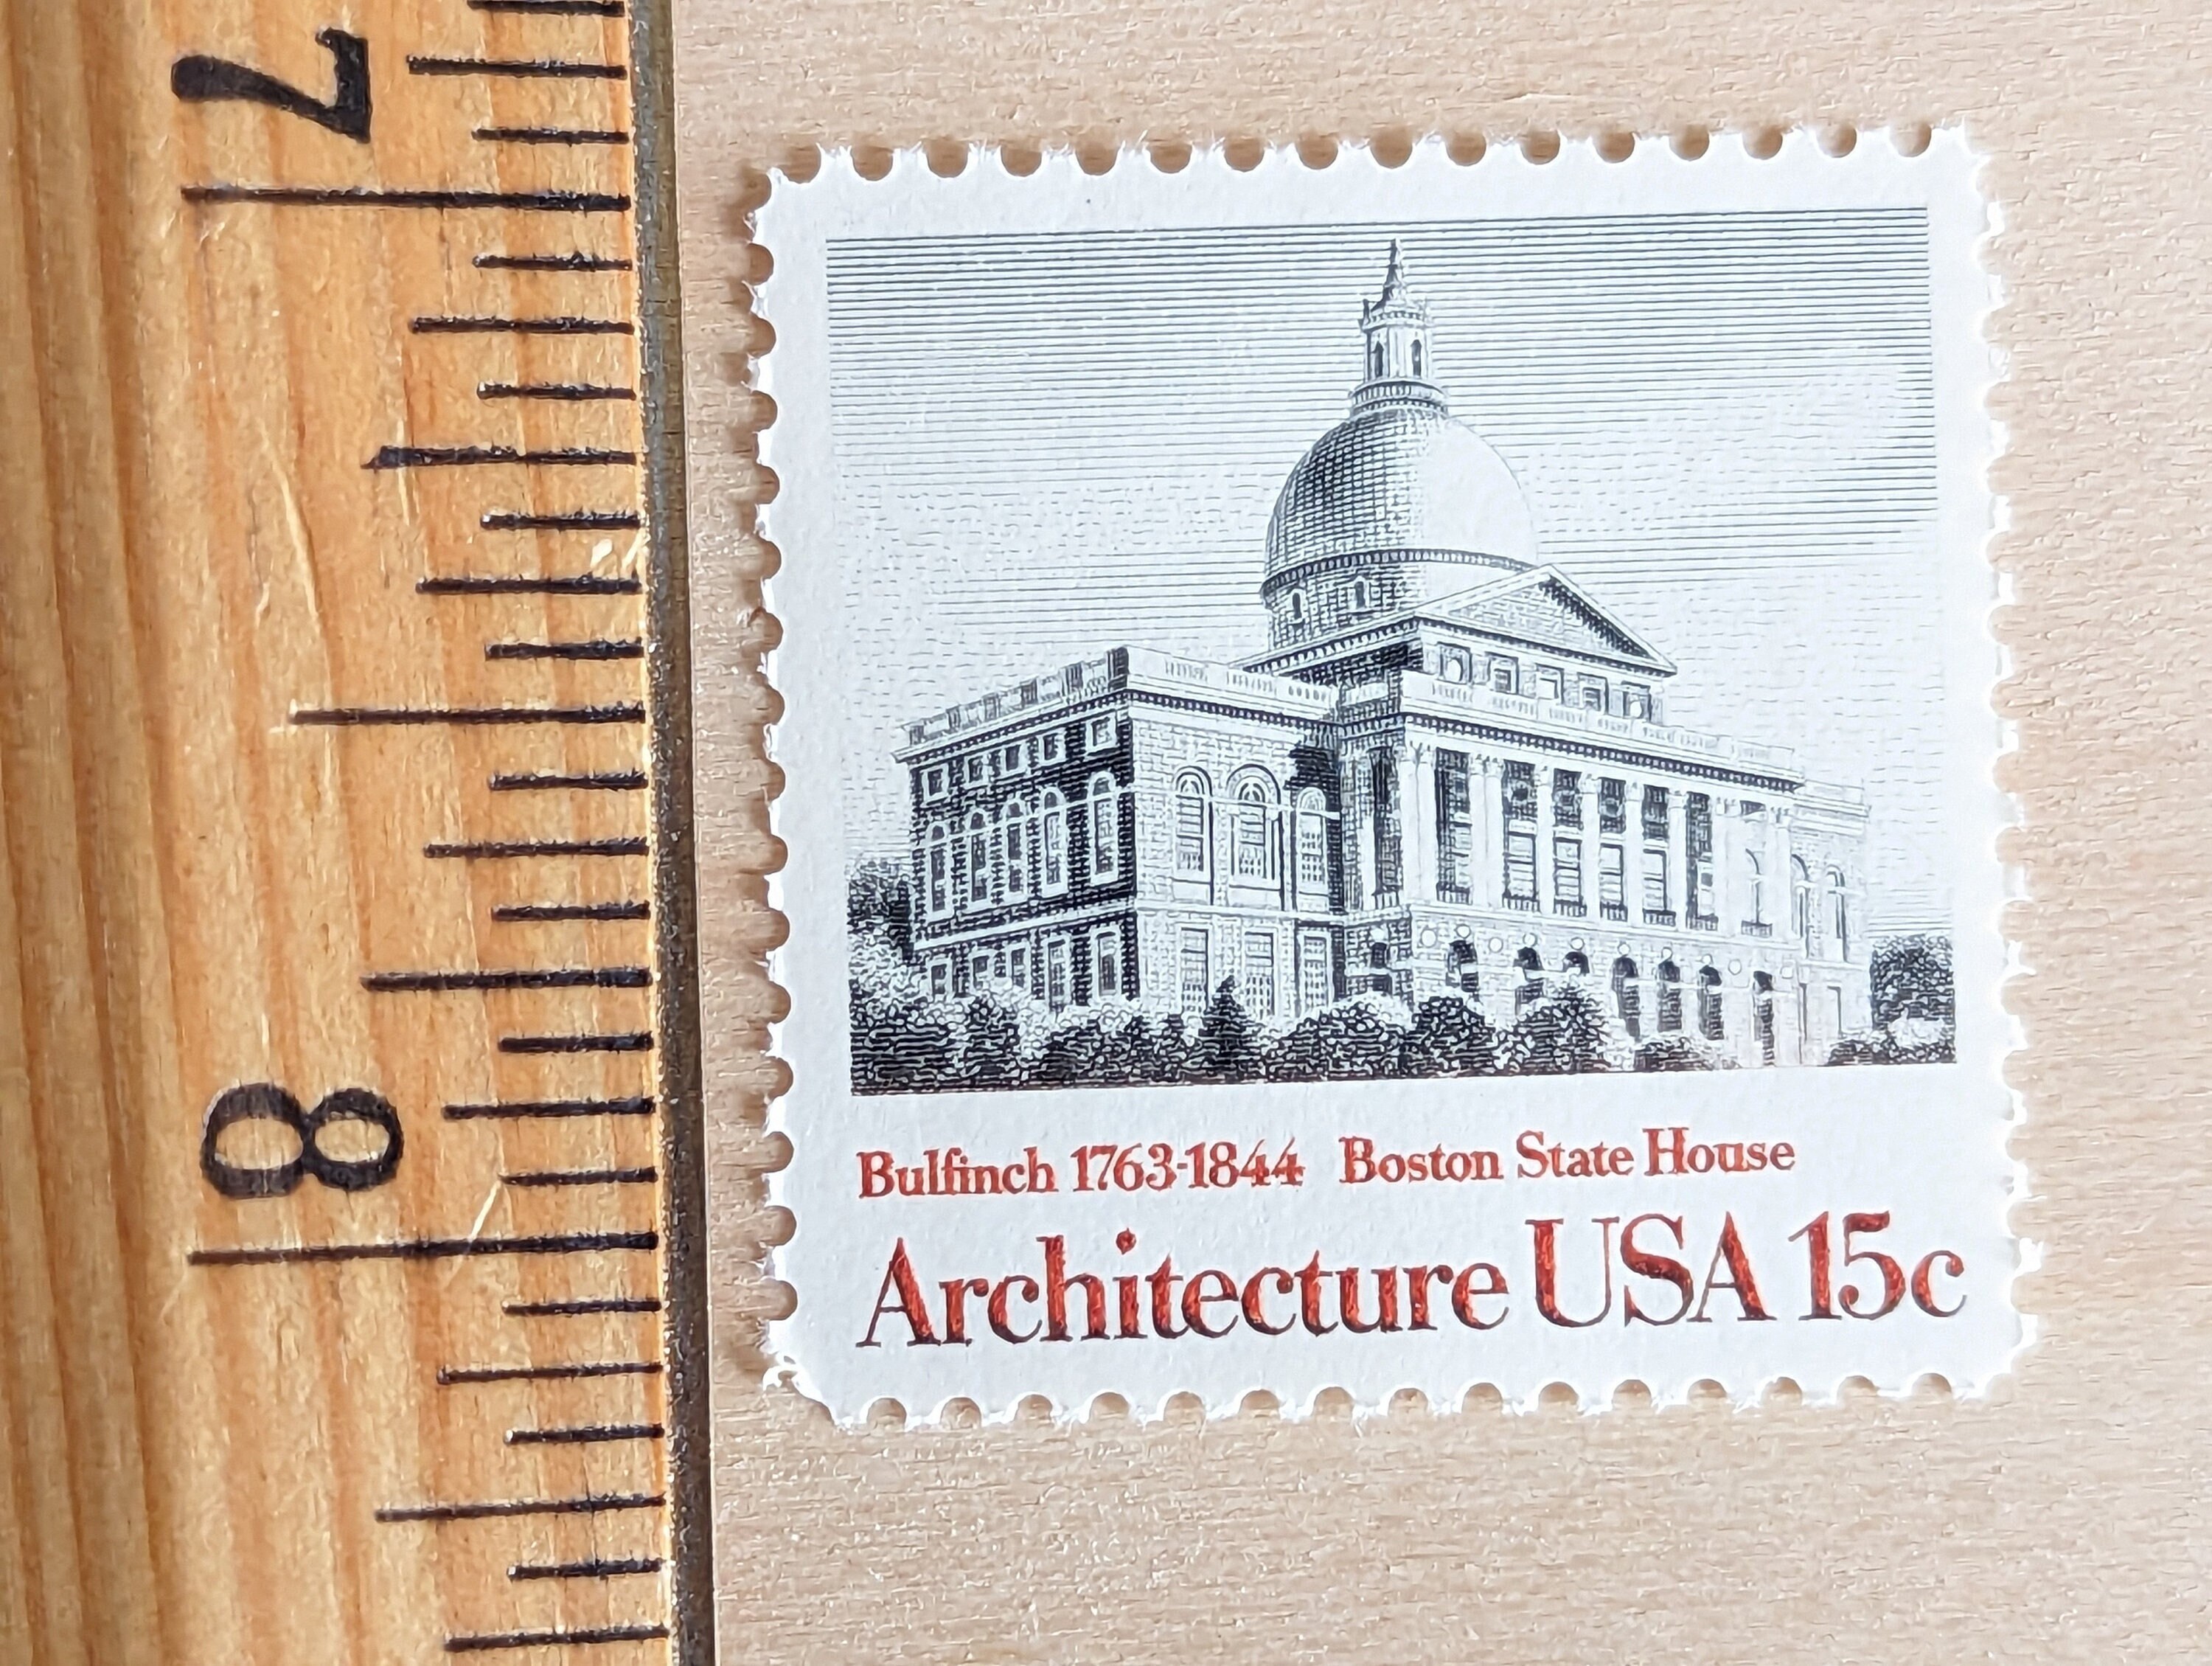 One 1 Library of Congress // Architecture vintage stamps 33c // 33 cent  stamp